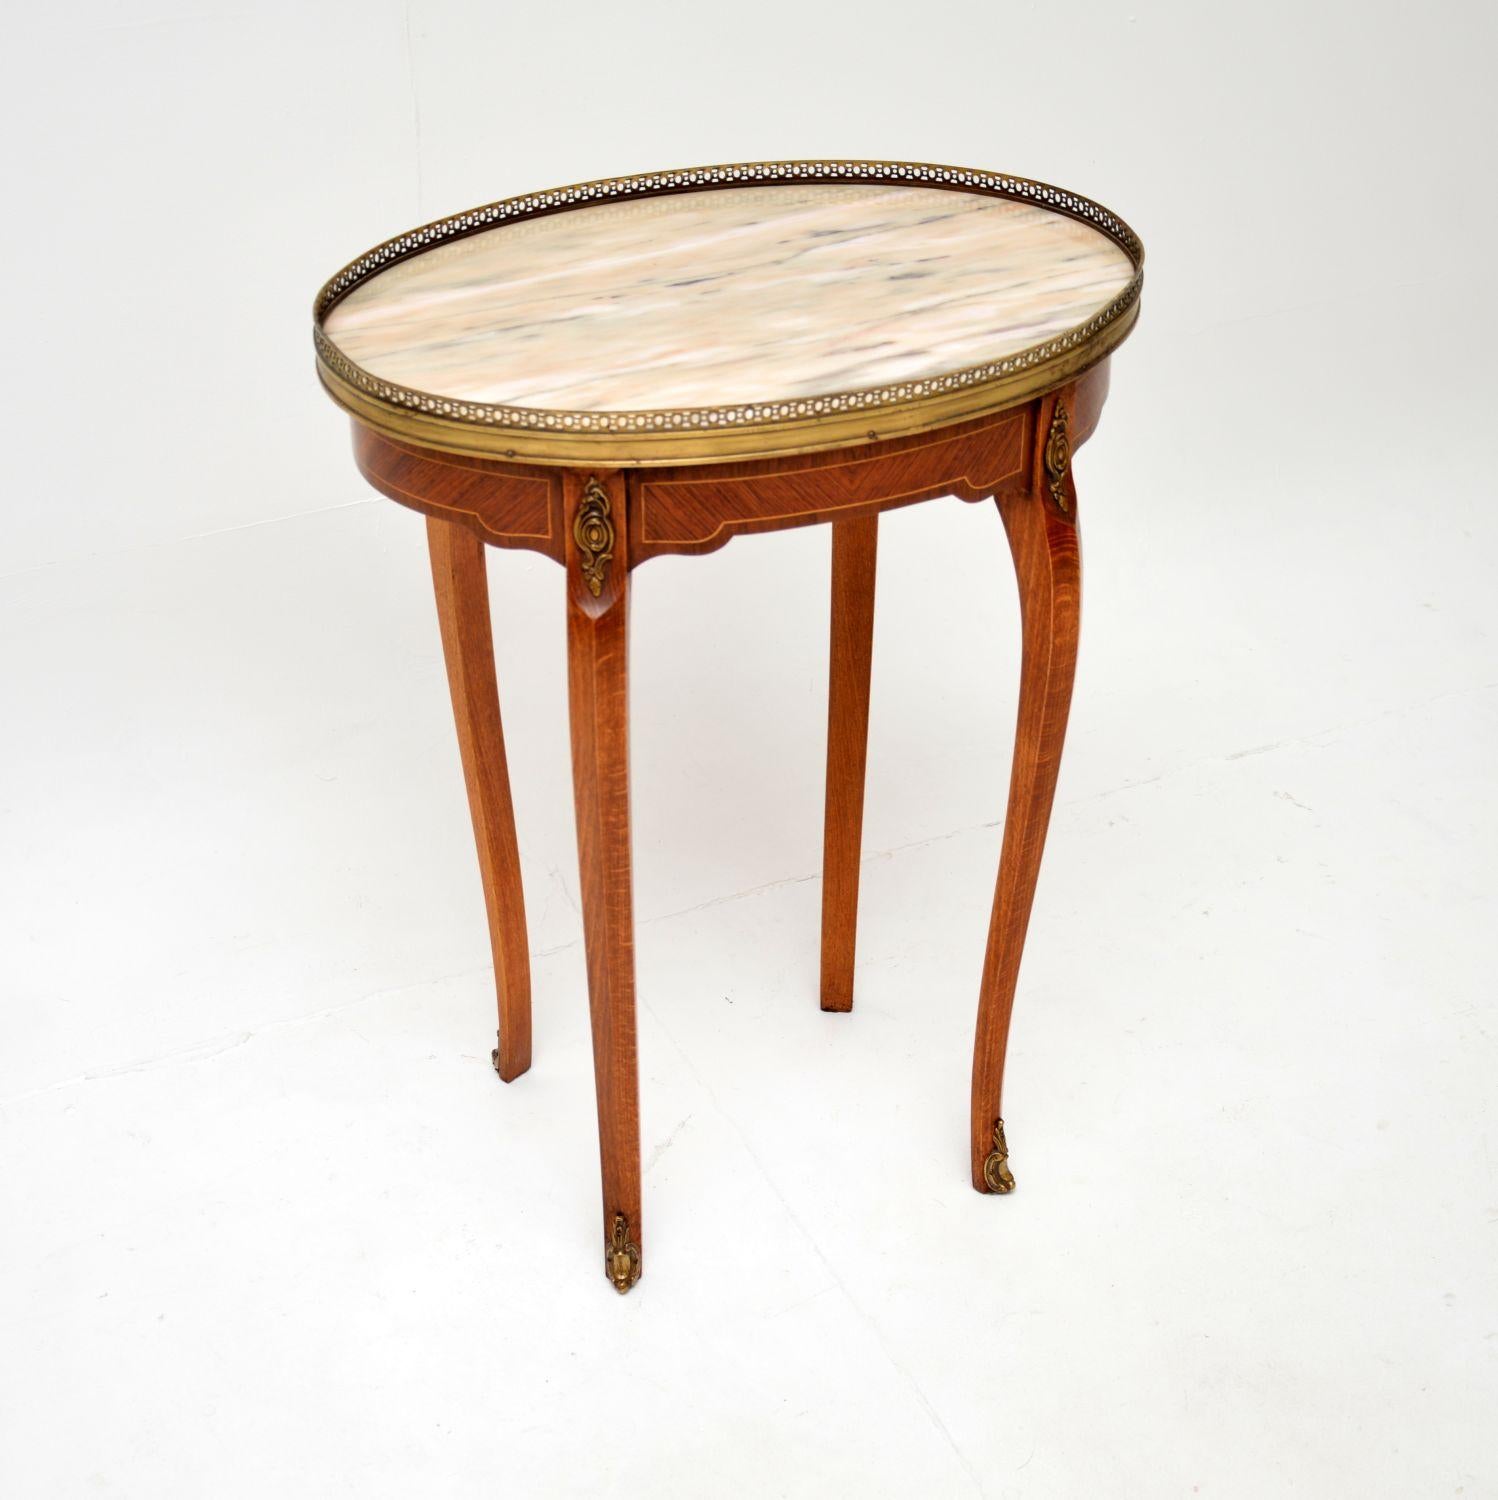 A beautiful antique French inlaid marble top side table, dating from around the 1930’s.

This is of superb quality and is a very useful size. The oval top is inlaid on all sides, meaning it can be used as a free standing item. There is a single